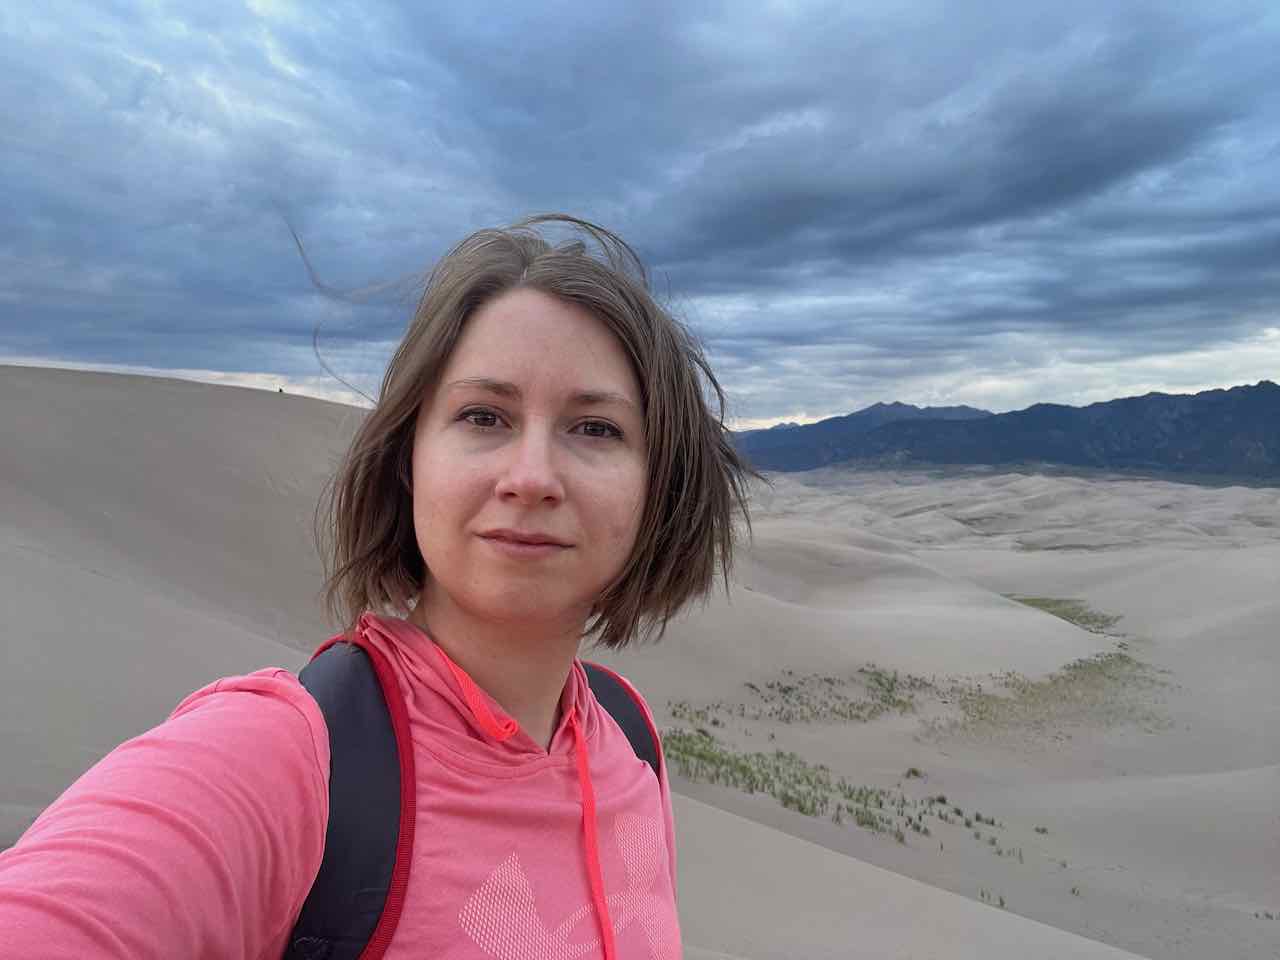 person-at-great-sand-dunes-national-park